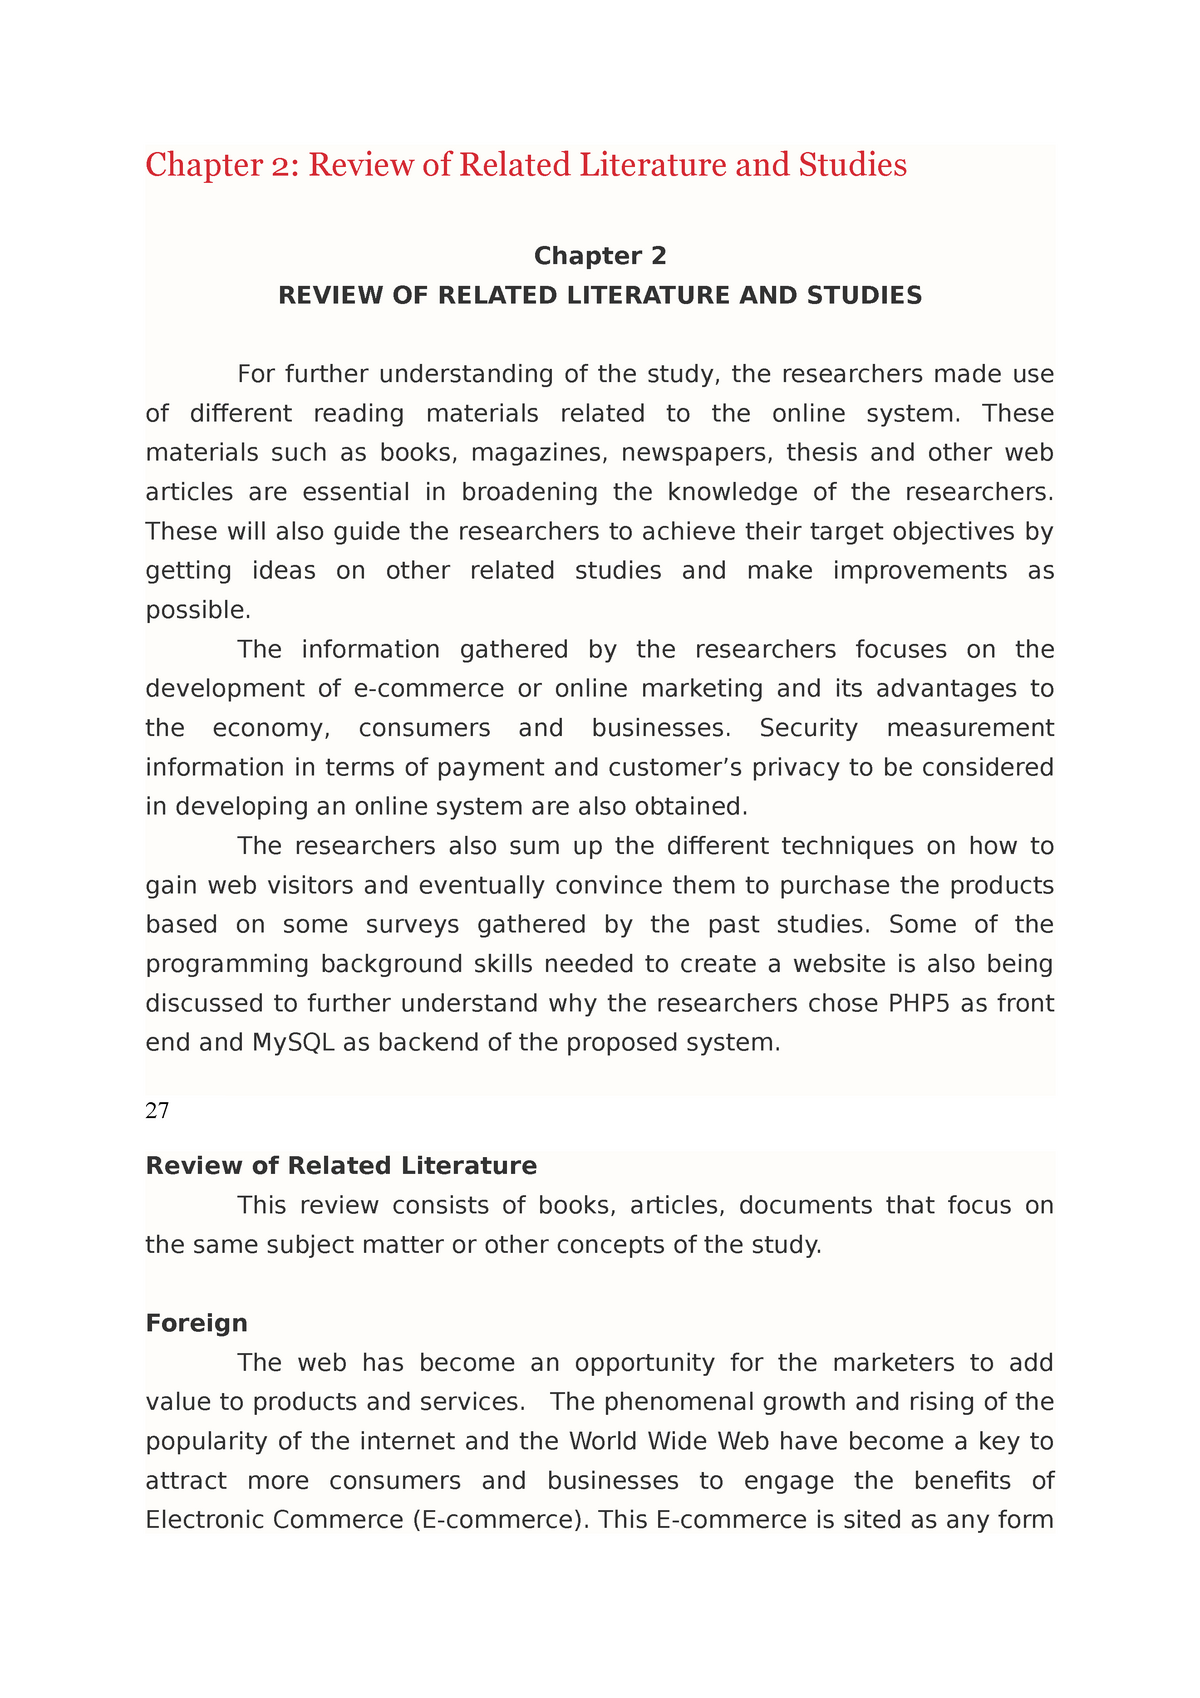 review of related literature and studies description